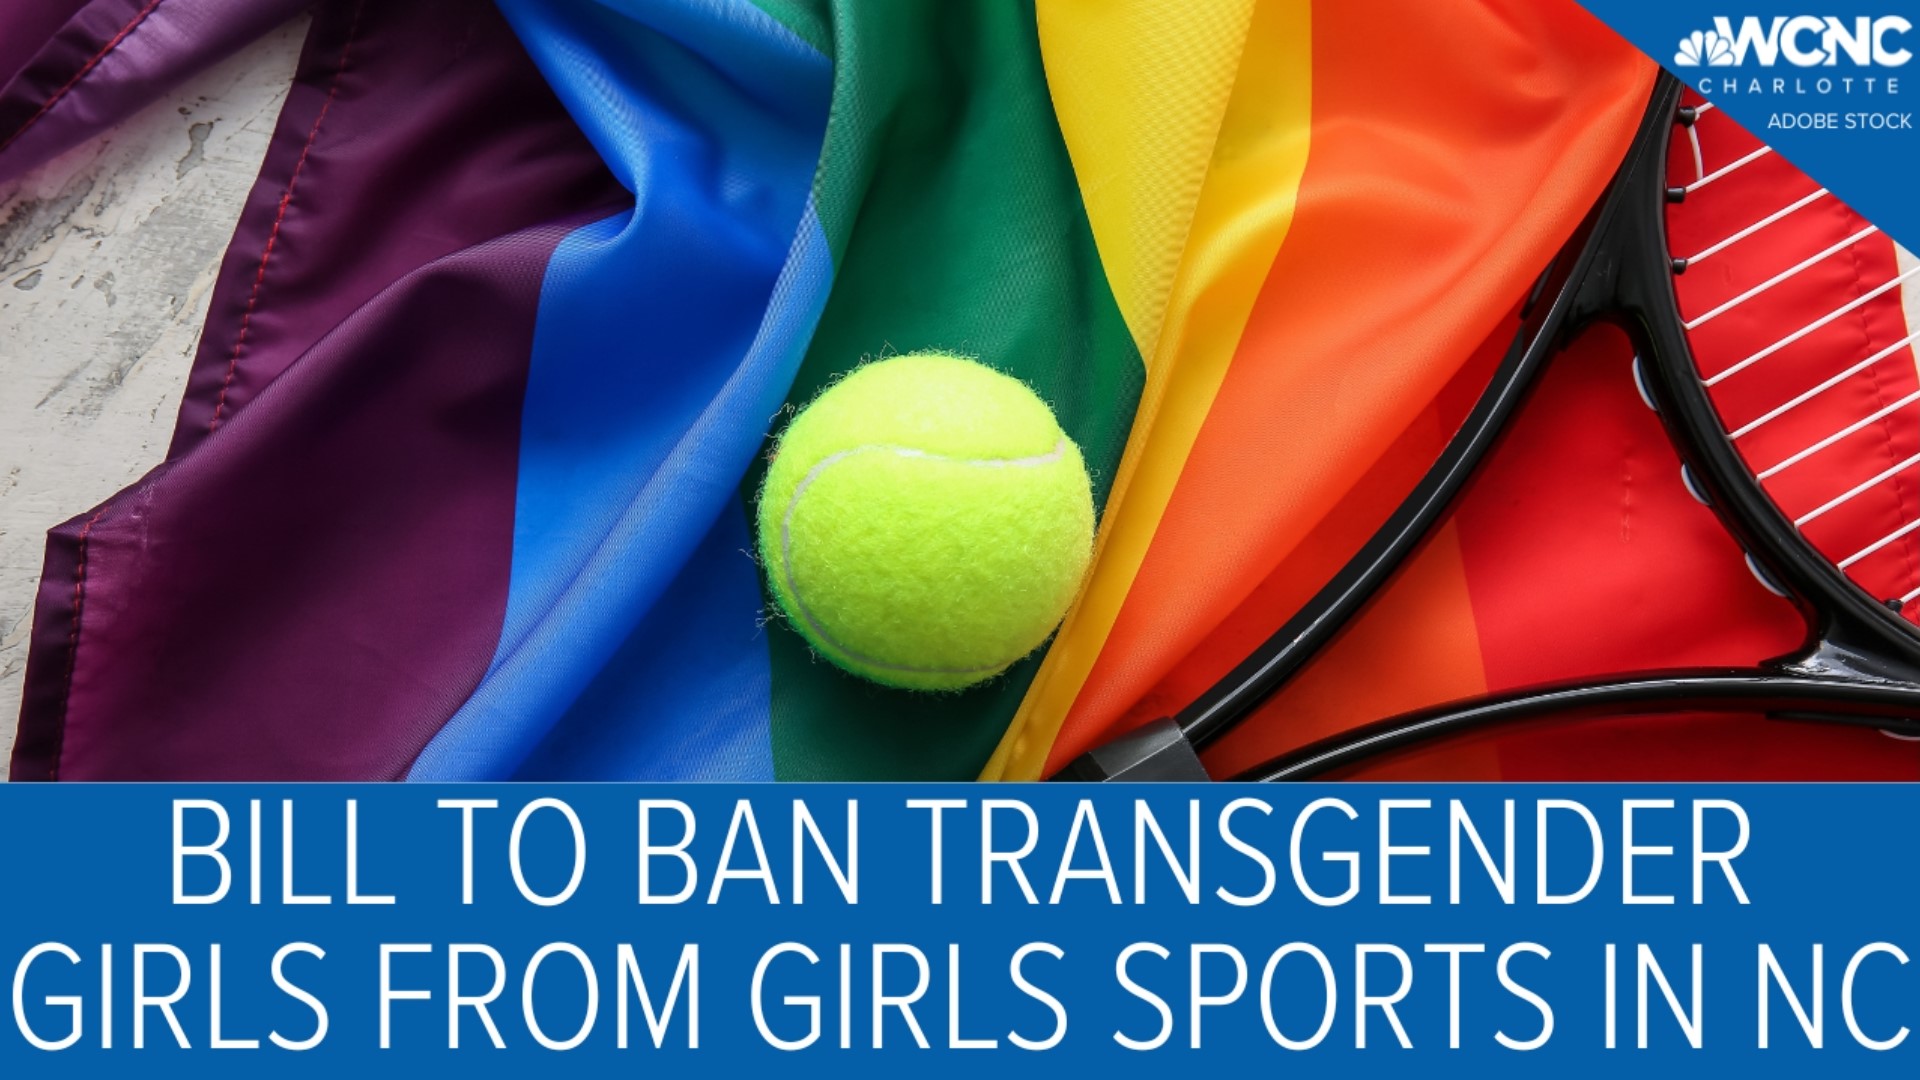 If enacted into law, transgender girls would be prohibited from participating in sports that correspond with their gender identity.